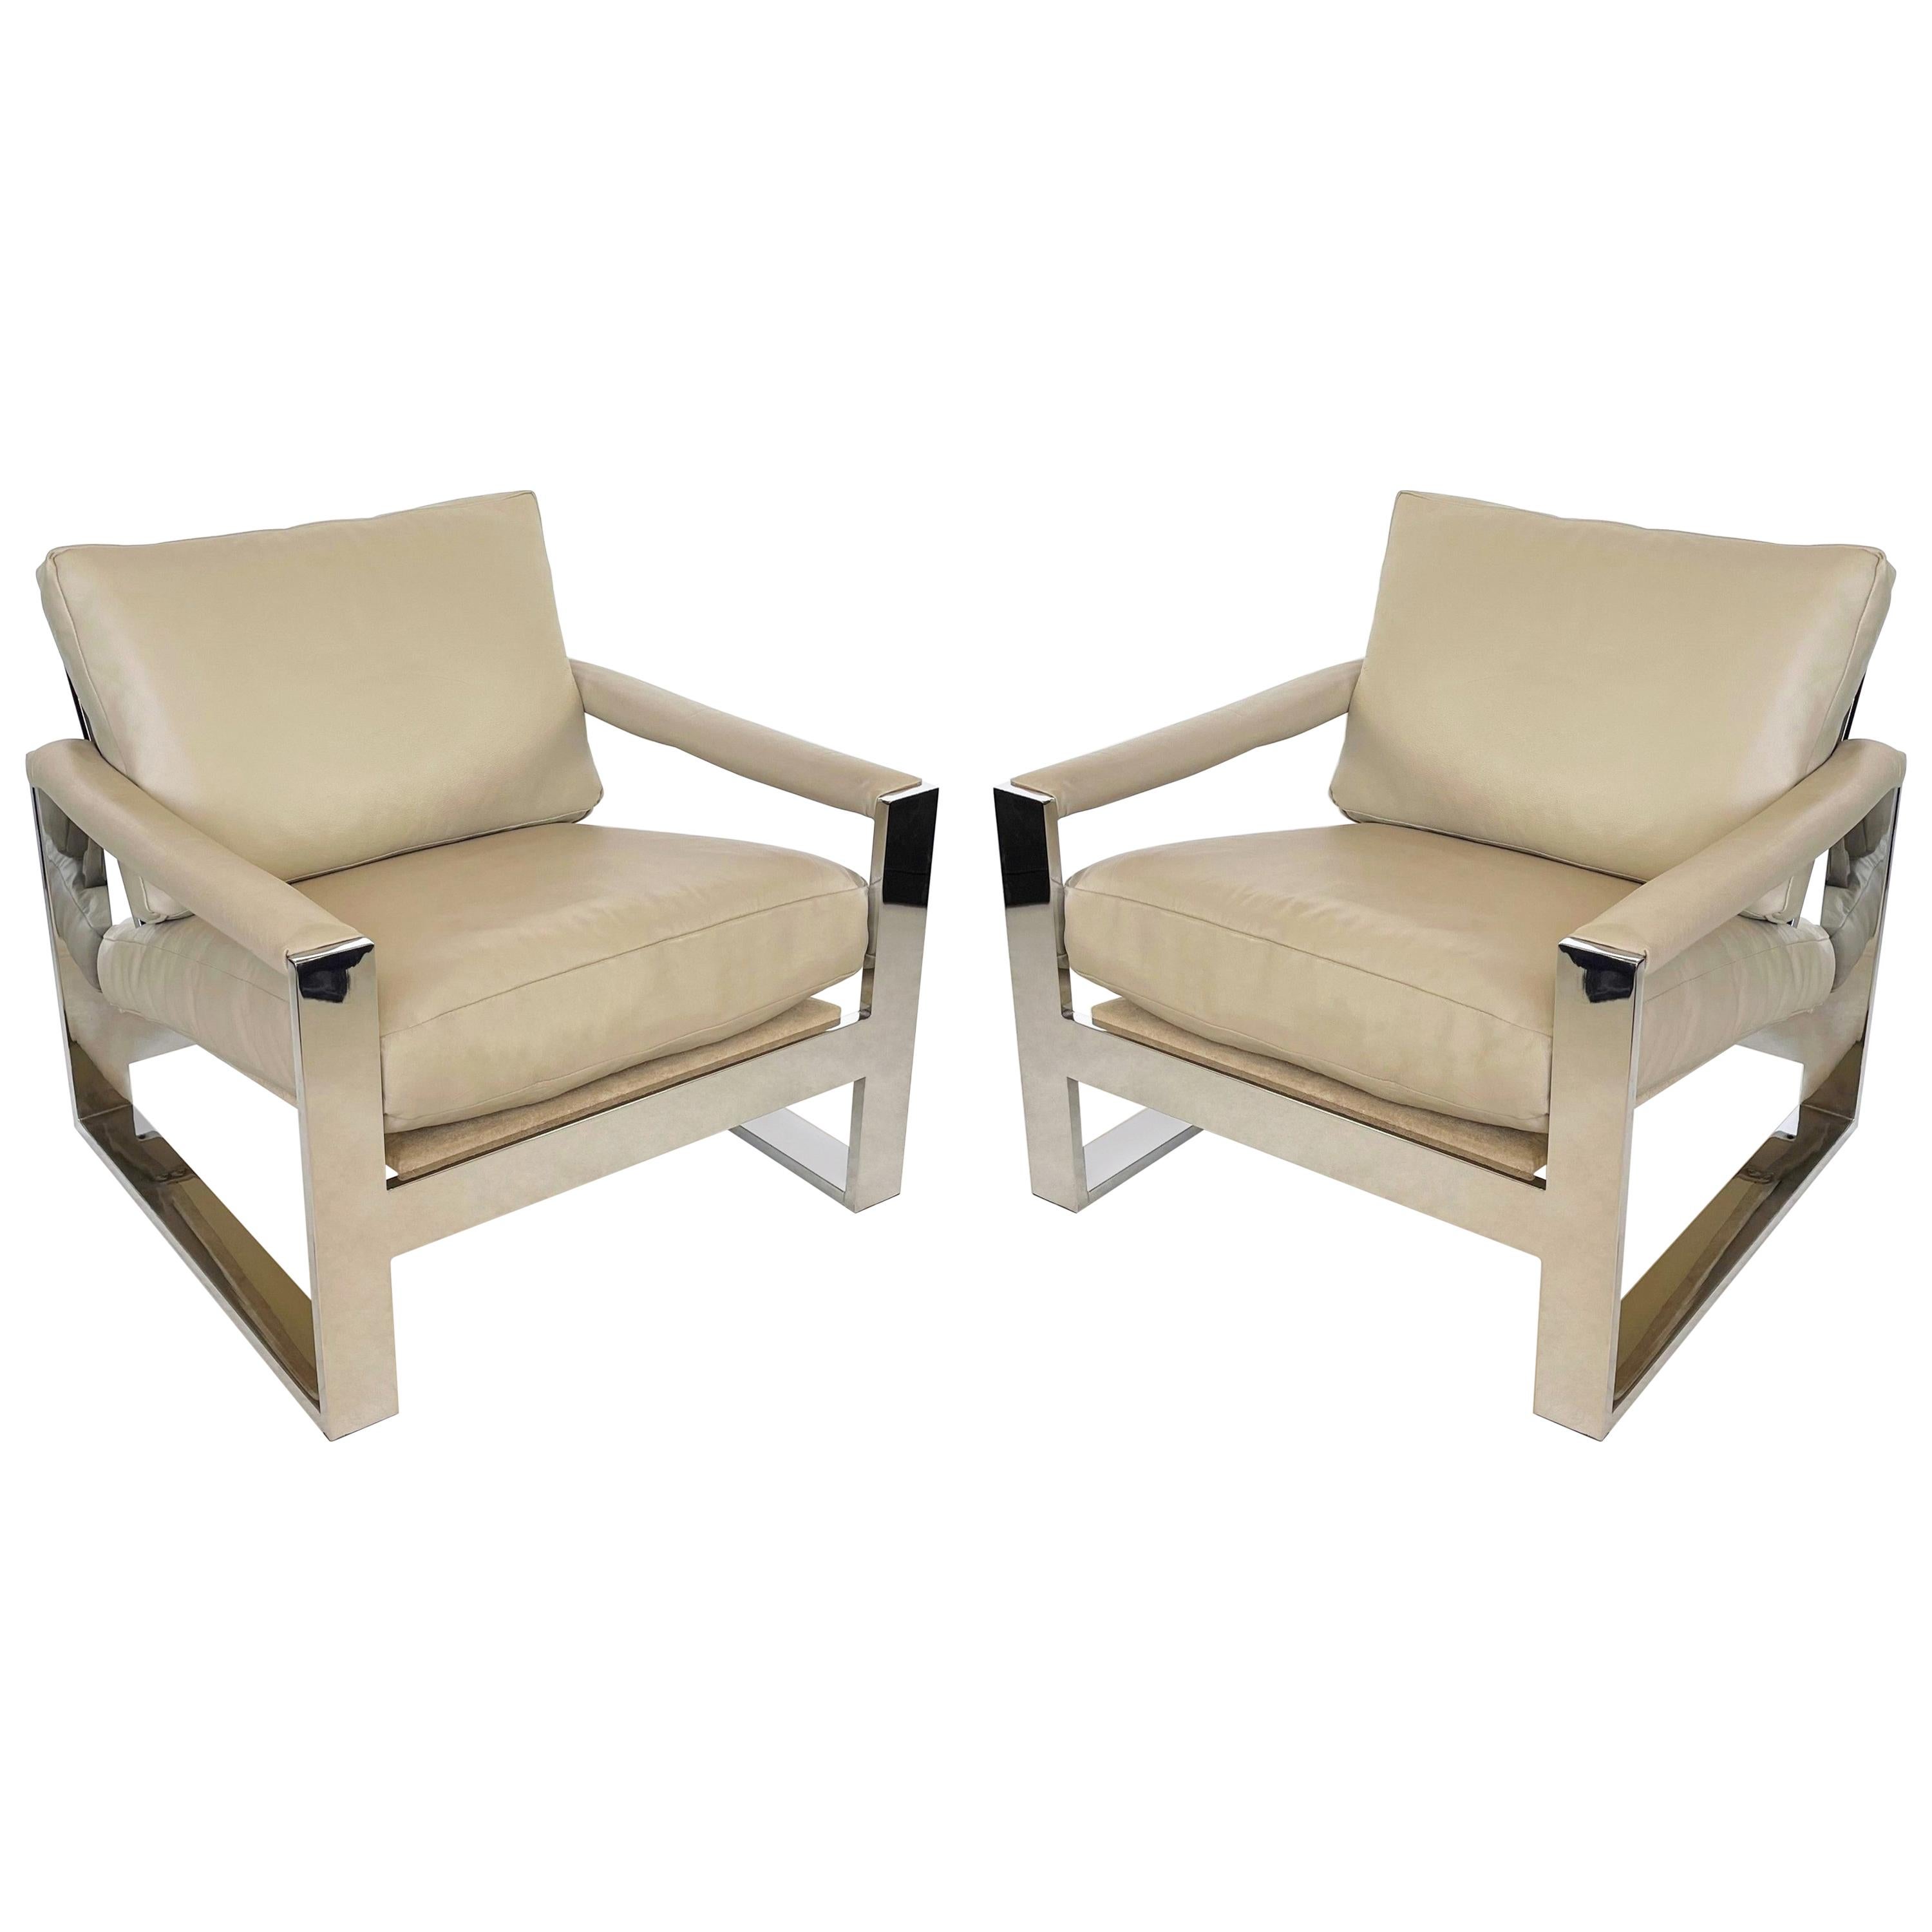 Pair of Streamlined Milo Baughman Flat Wide-Band Leather Chairs